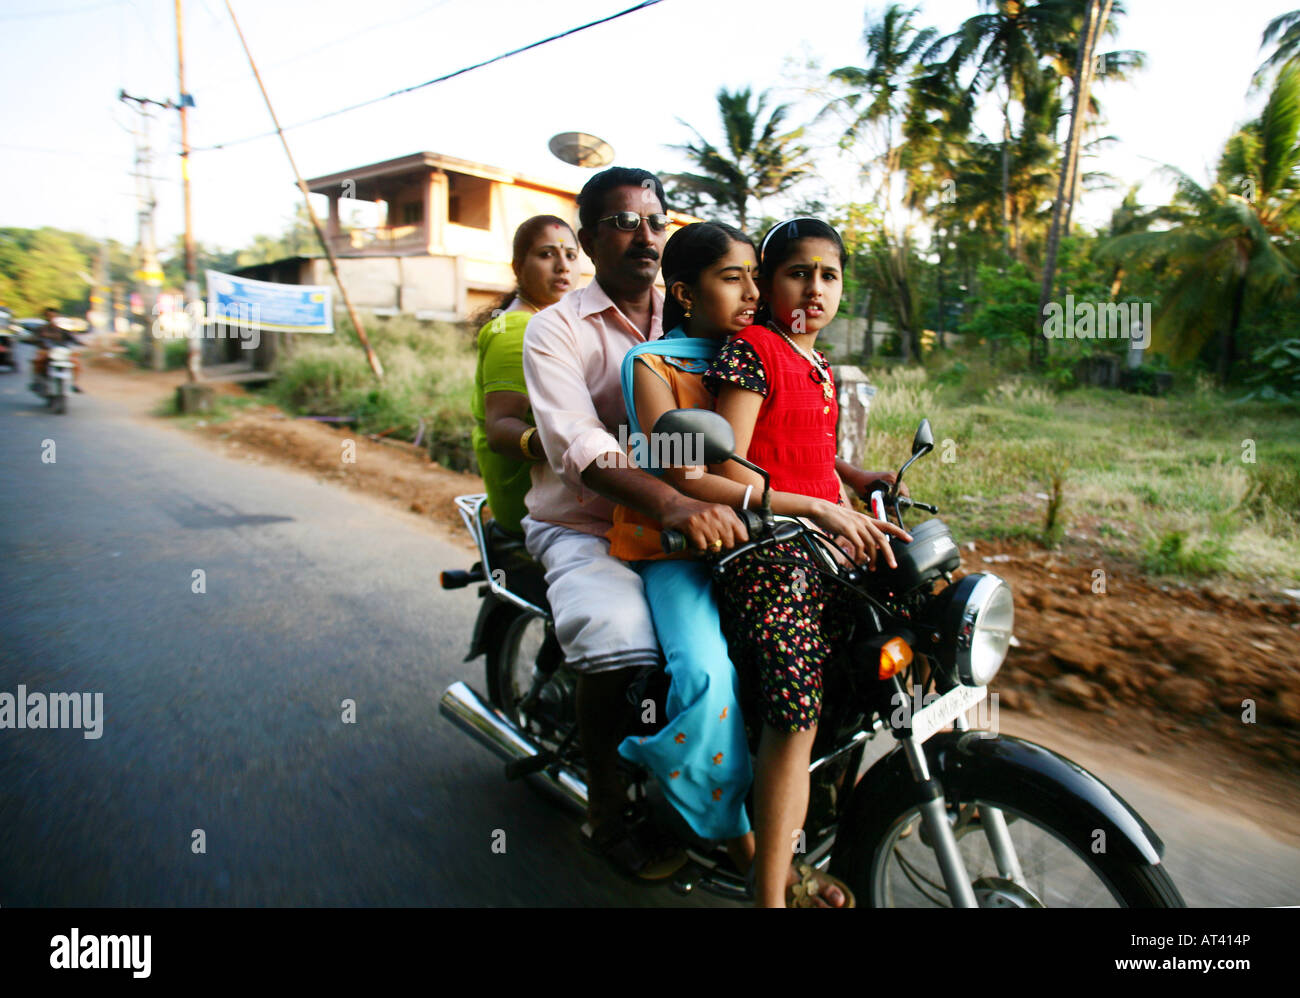 A toung indian family all on a motorbike in india Stock Photo